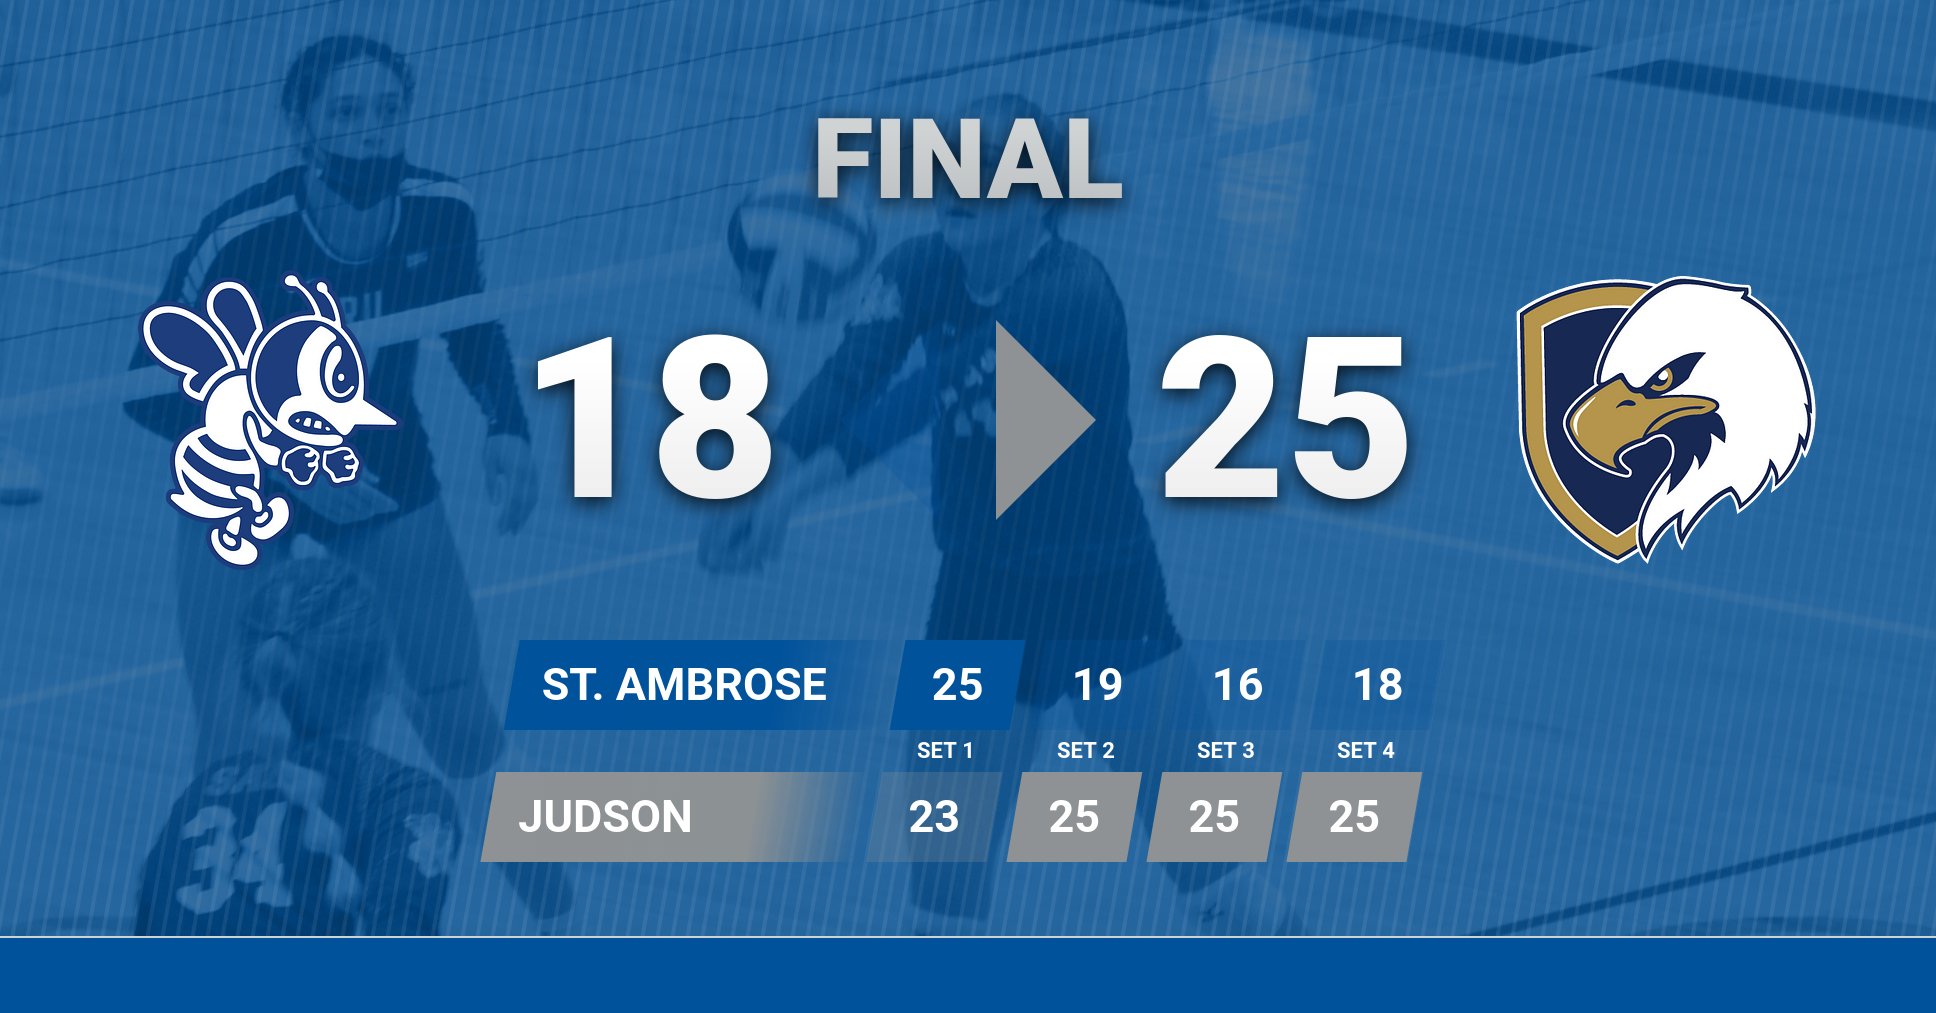 Streak snapped in four-set loss at Judson